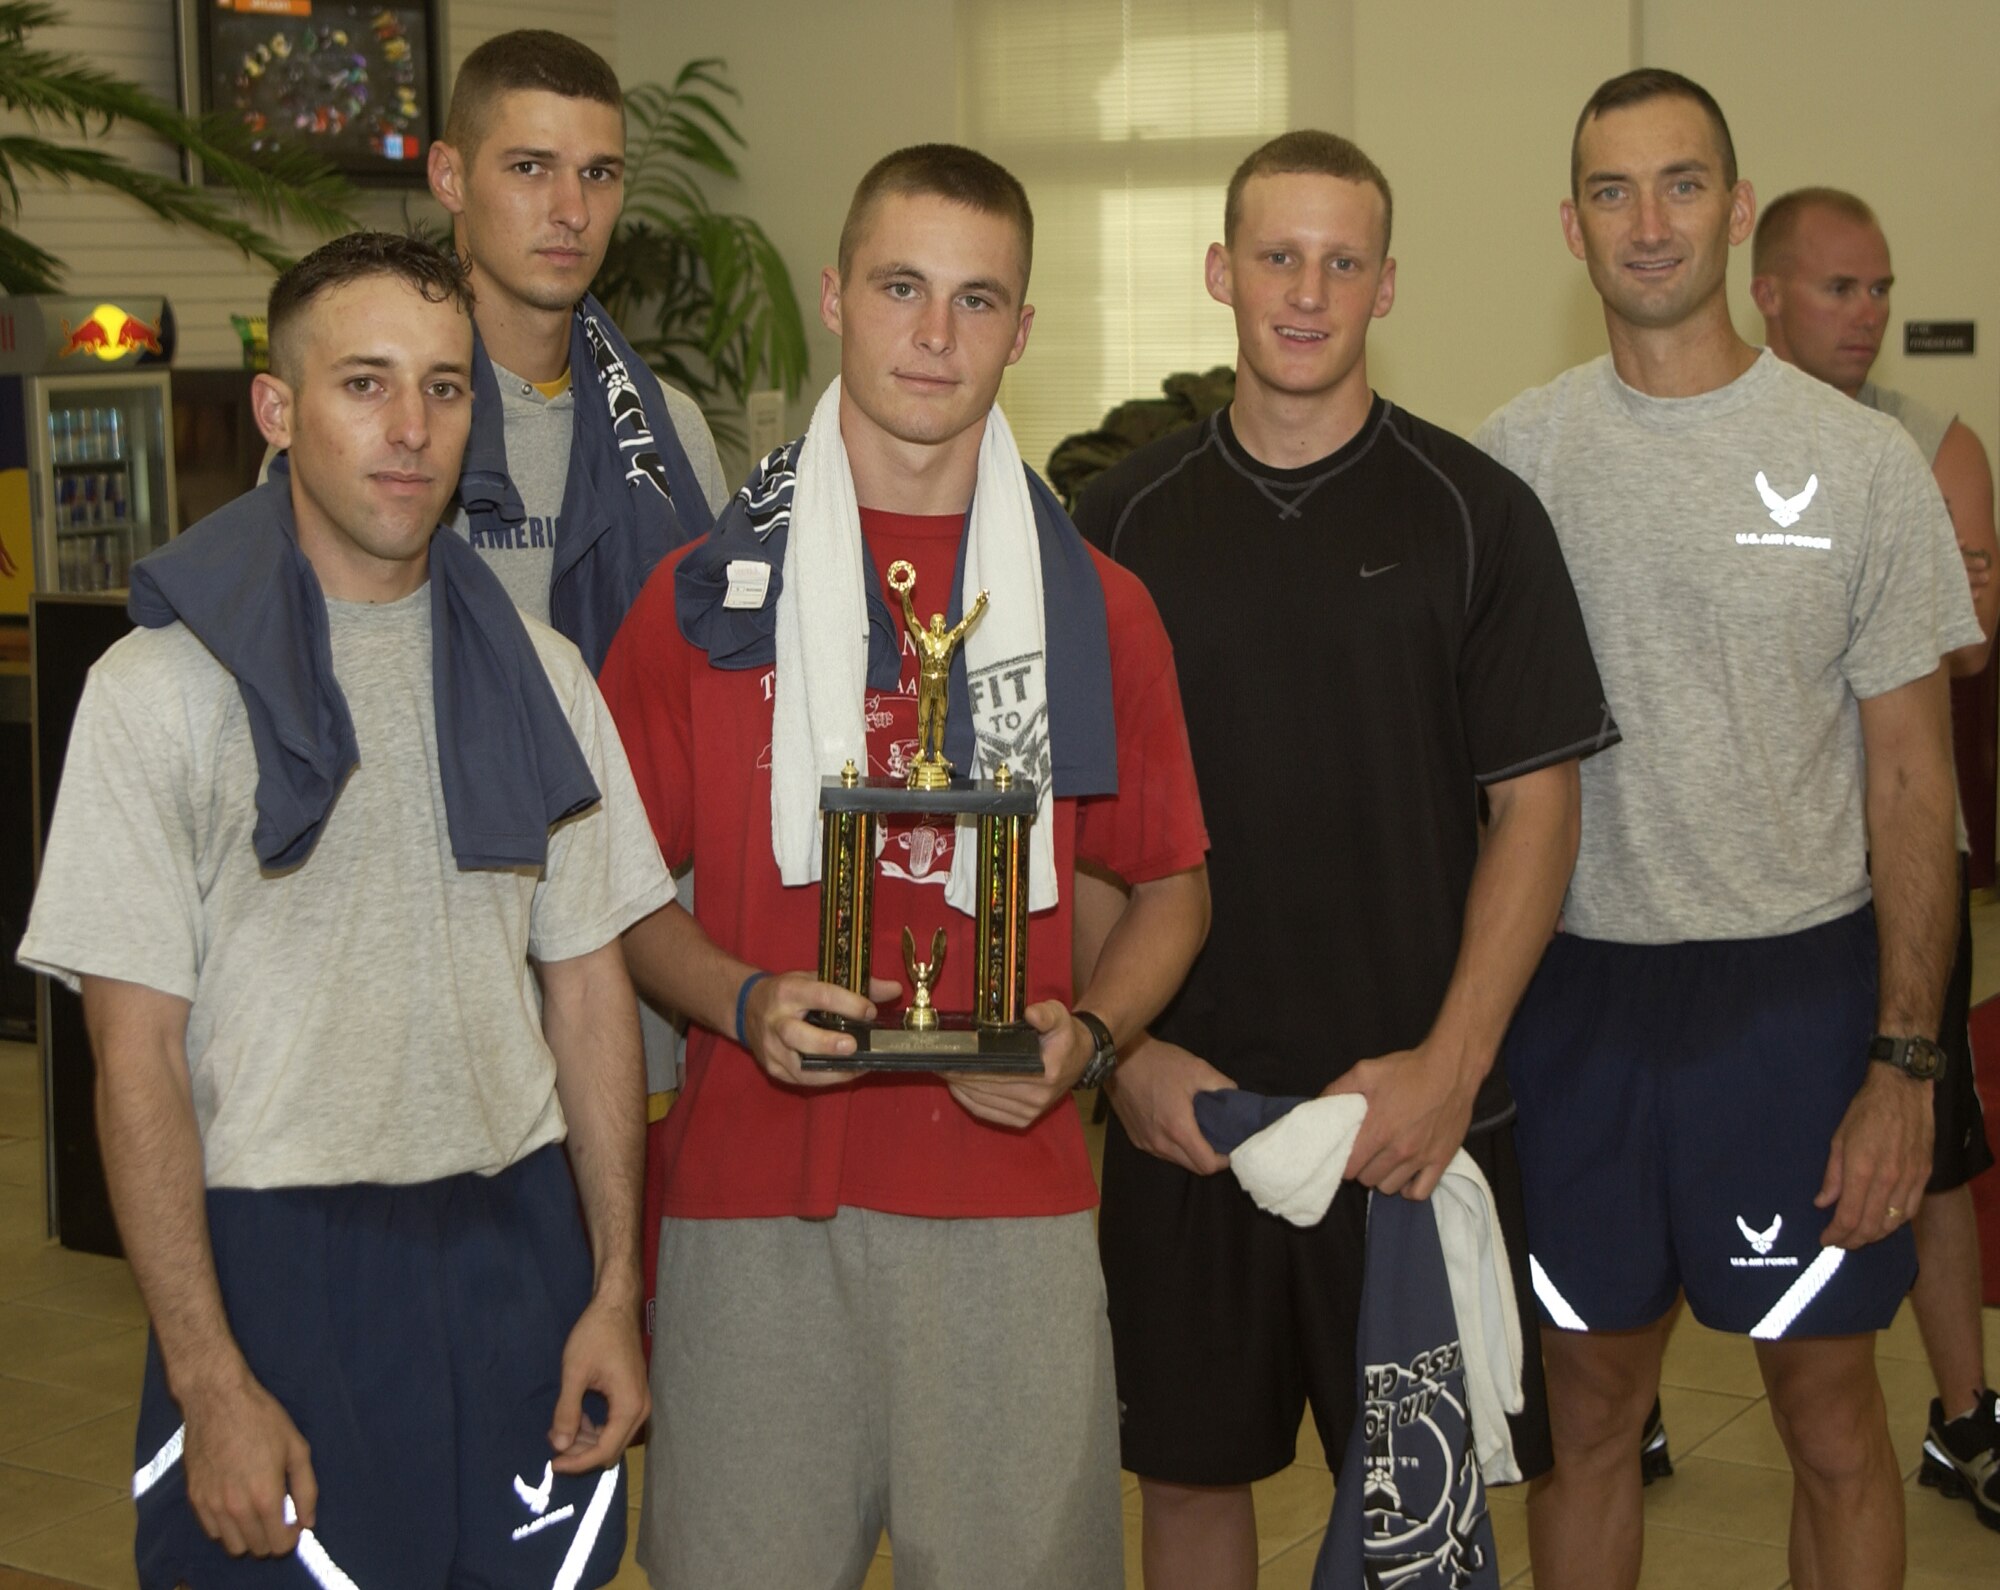 ANDERSEN AIR FORCE BASE, Guam - Staff Sgt. Corey Vento, Senior Airman Kyle Altstaetter, Airman 1st Class Andrew Rogers, Airman 1st Class Steven Burlbaw and Maj. Troy Roberts, formed the 736th Security Forces Squadron team that won Andersen's Fitness Challenge Sept. 1 at the base fitness center.  The 554th RED HORSE squadron won second place and the 36th Operations Support Squadron took third.  Major Roberts placed first in the three mile run and the sit and reach contests; Senior Airman Bryan Nagy, from the 644th Combat Communications Squadron, placed first placed in the push ups and sit ups contests; and 1st Lt. John Casey, from the 554th RED HORSE Squadron, placed first in the body composition category.  (Photo by Tech Sgt. Brian Bahret/36th Wing Public Affairs)